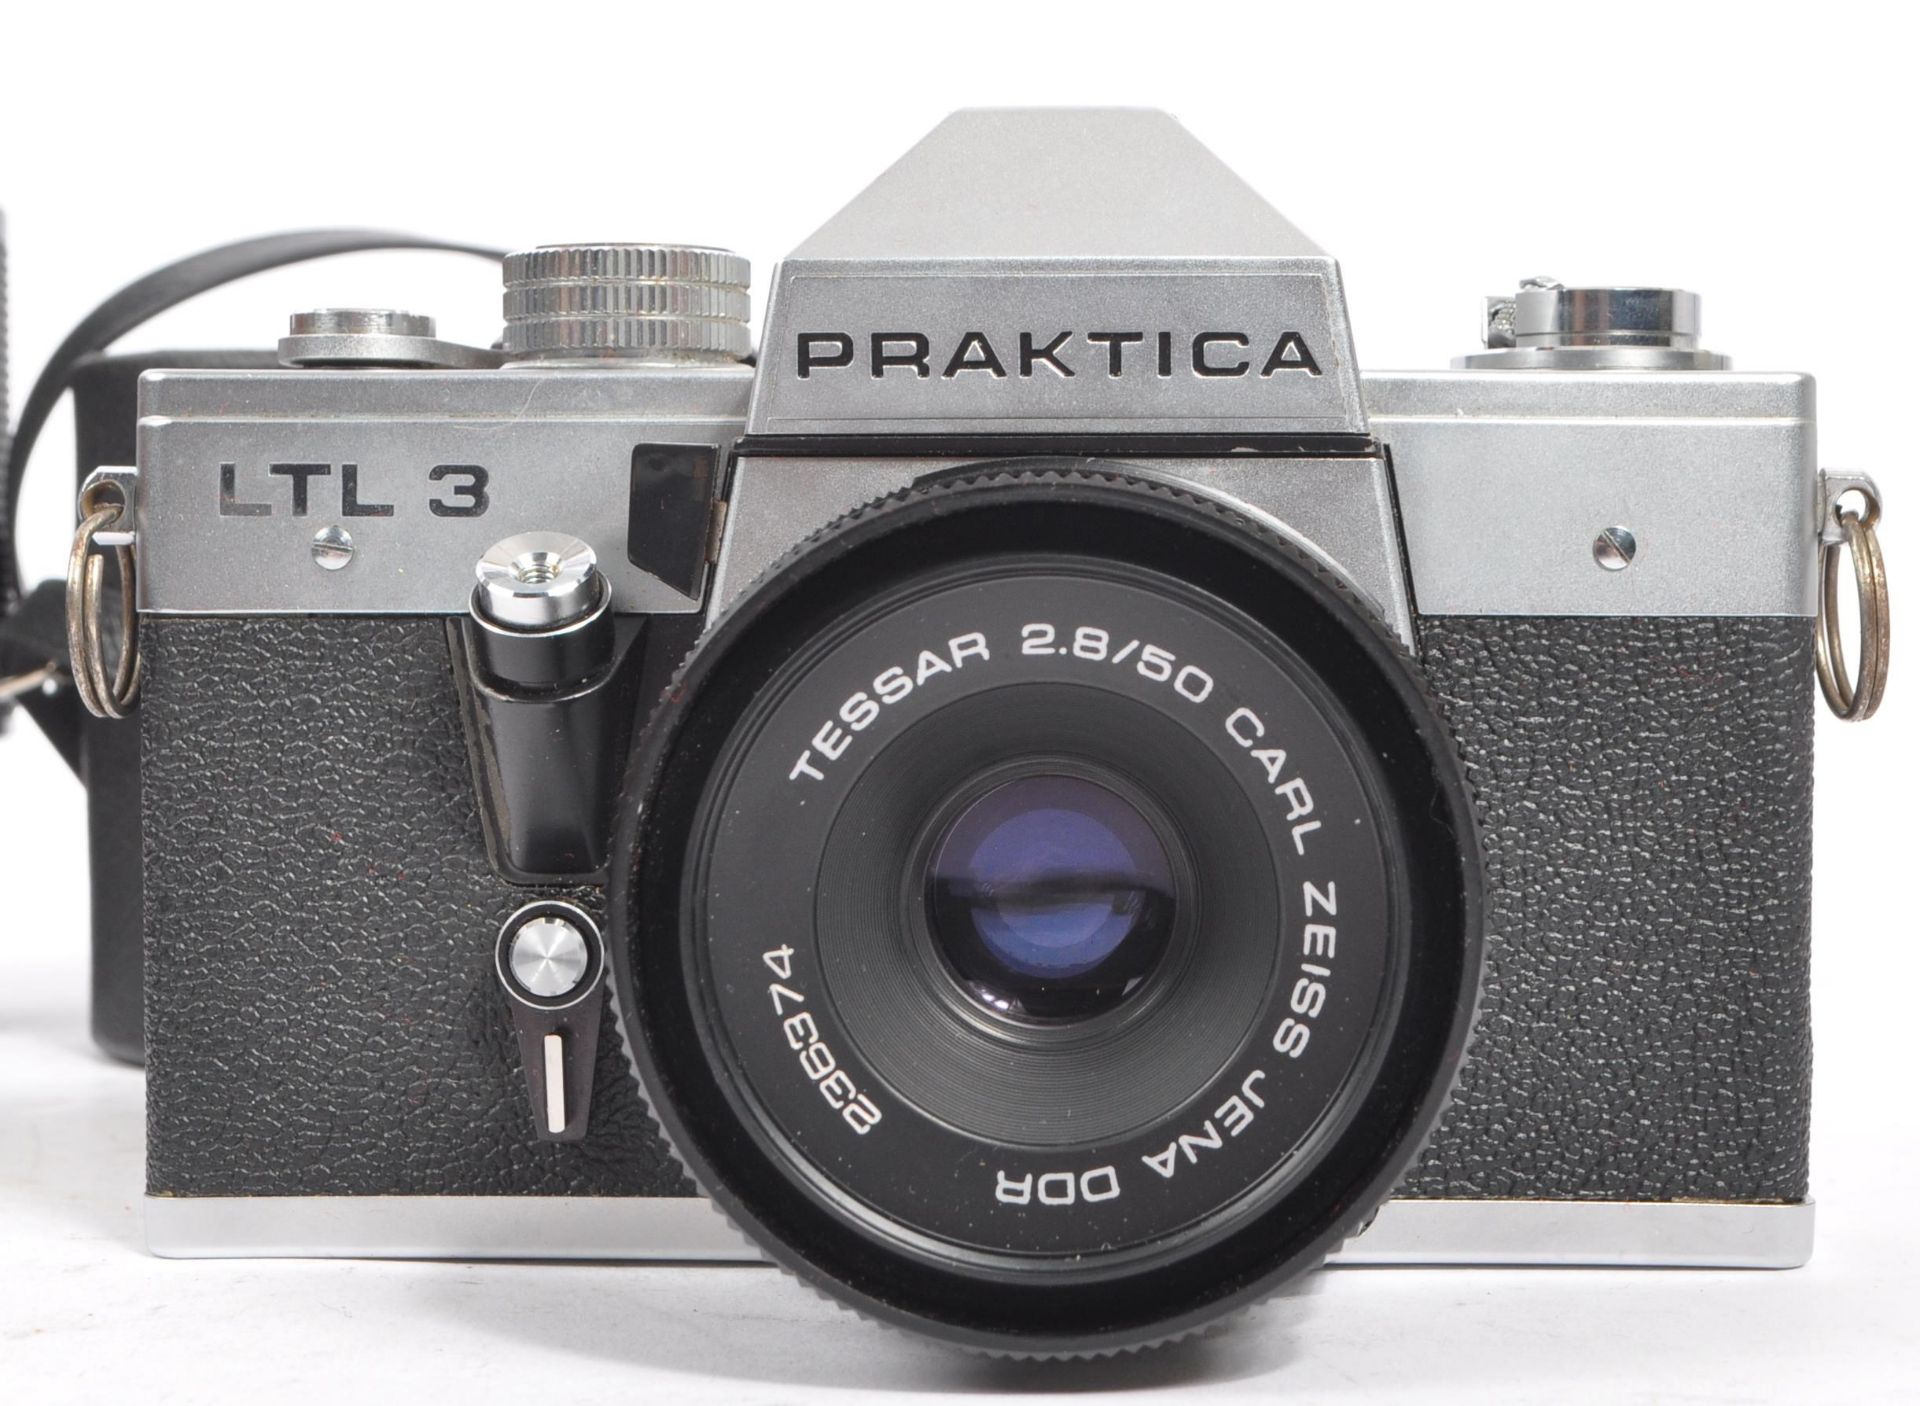 PRAKTICA - COLLECTION OF 35MM CAMERAS AND LENSES - Image 4 of 9